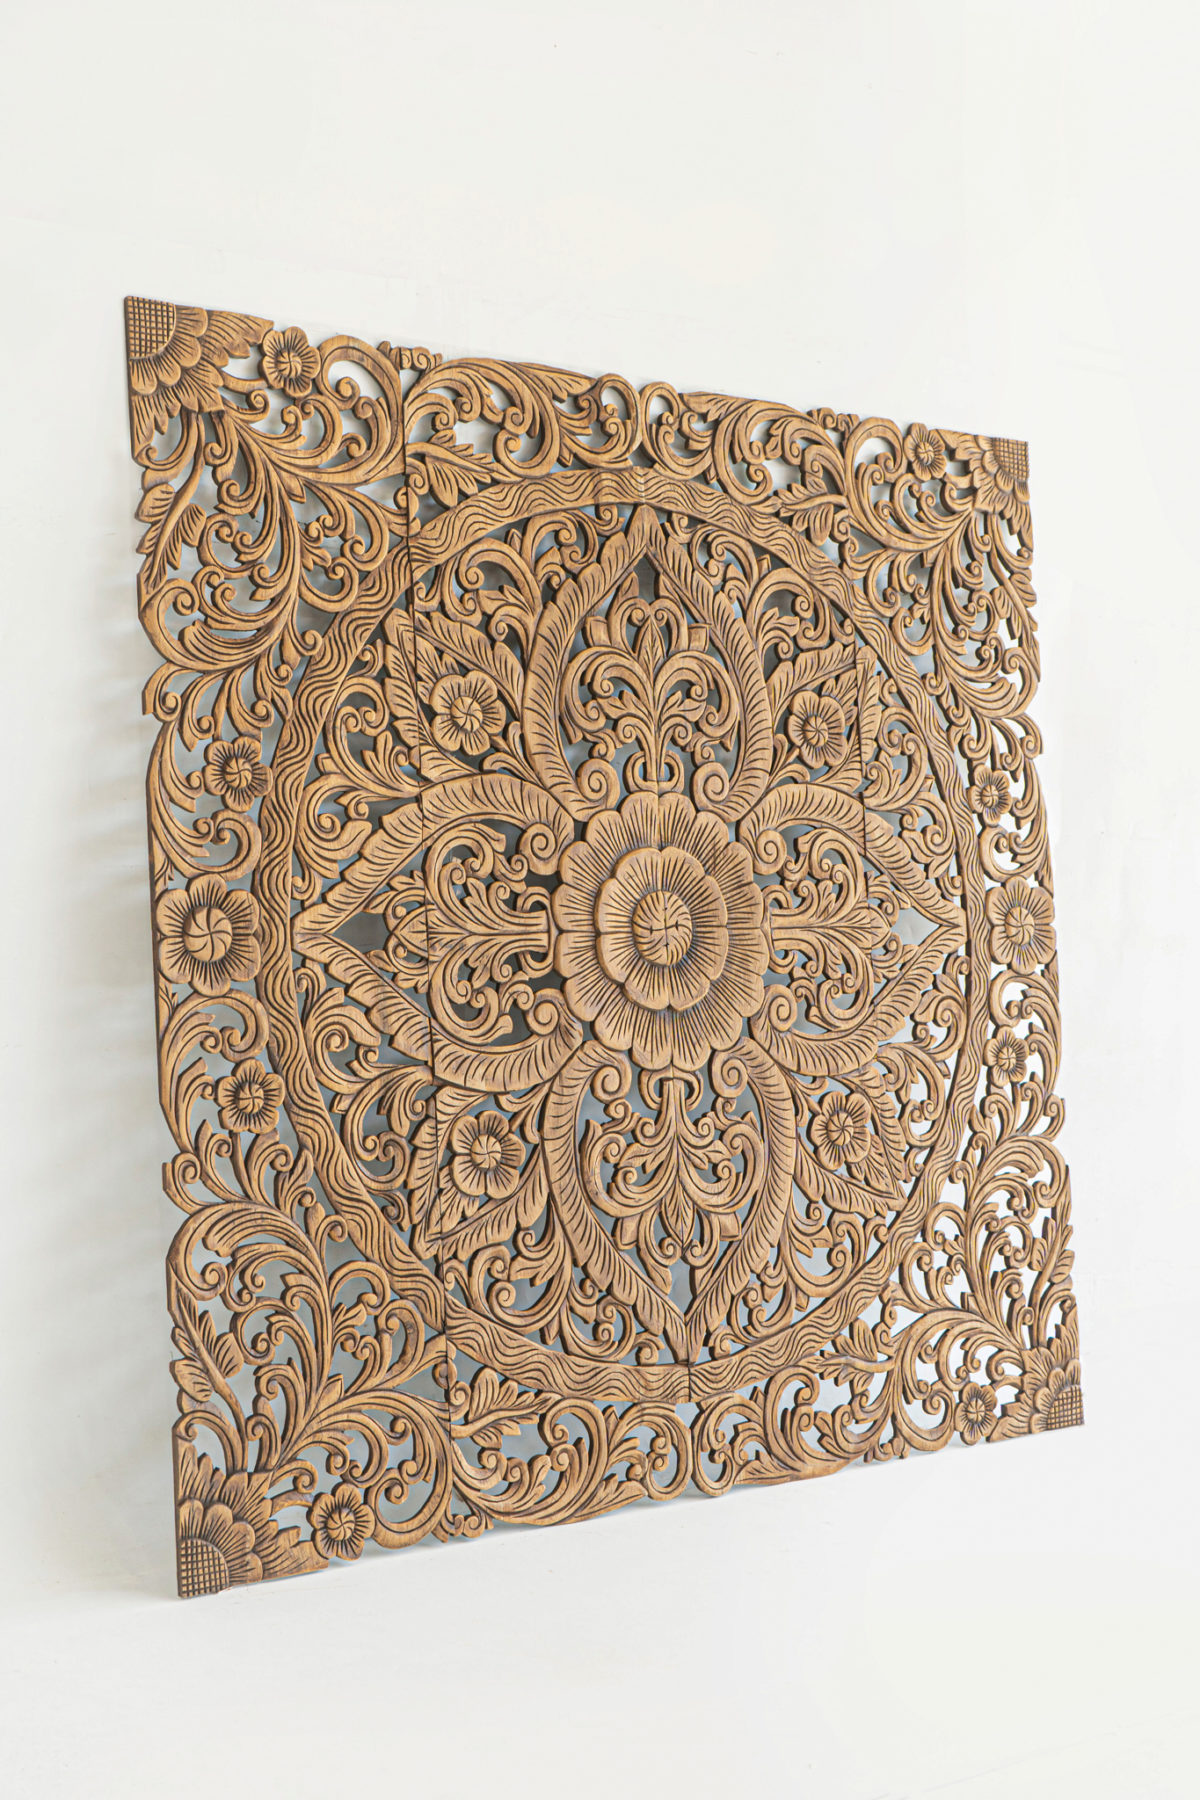 Handcrafted hand carved wall art